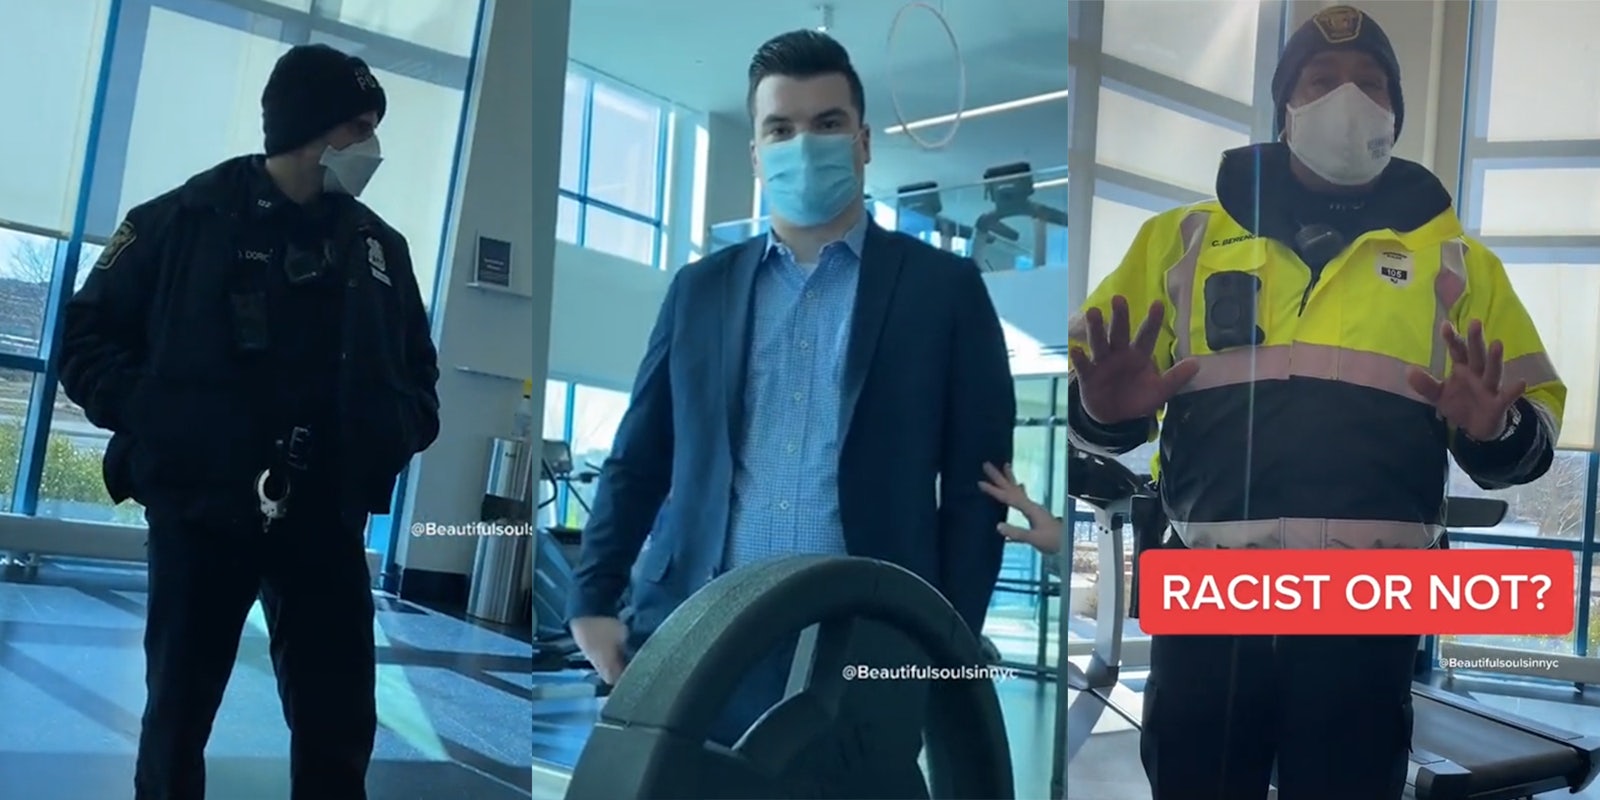 police officers and man in suit with mask inside gym, with caption 'Racist or not?'